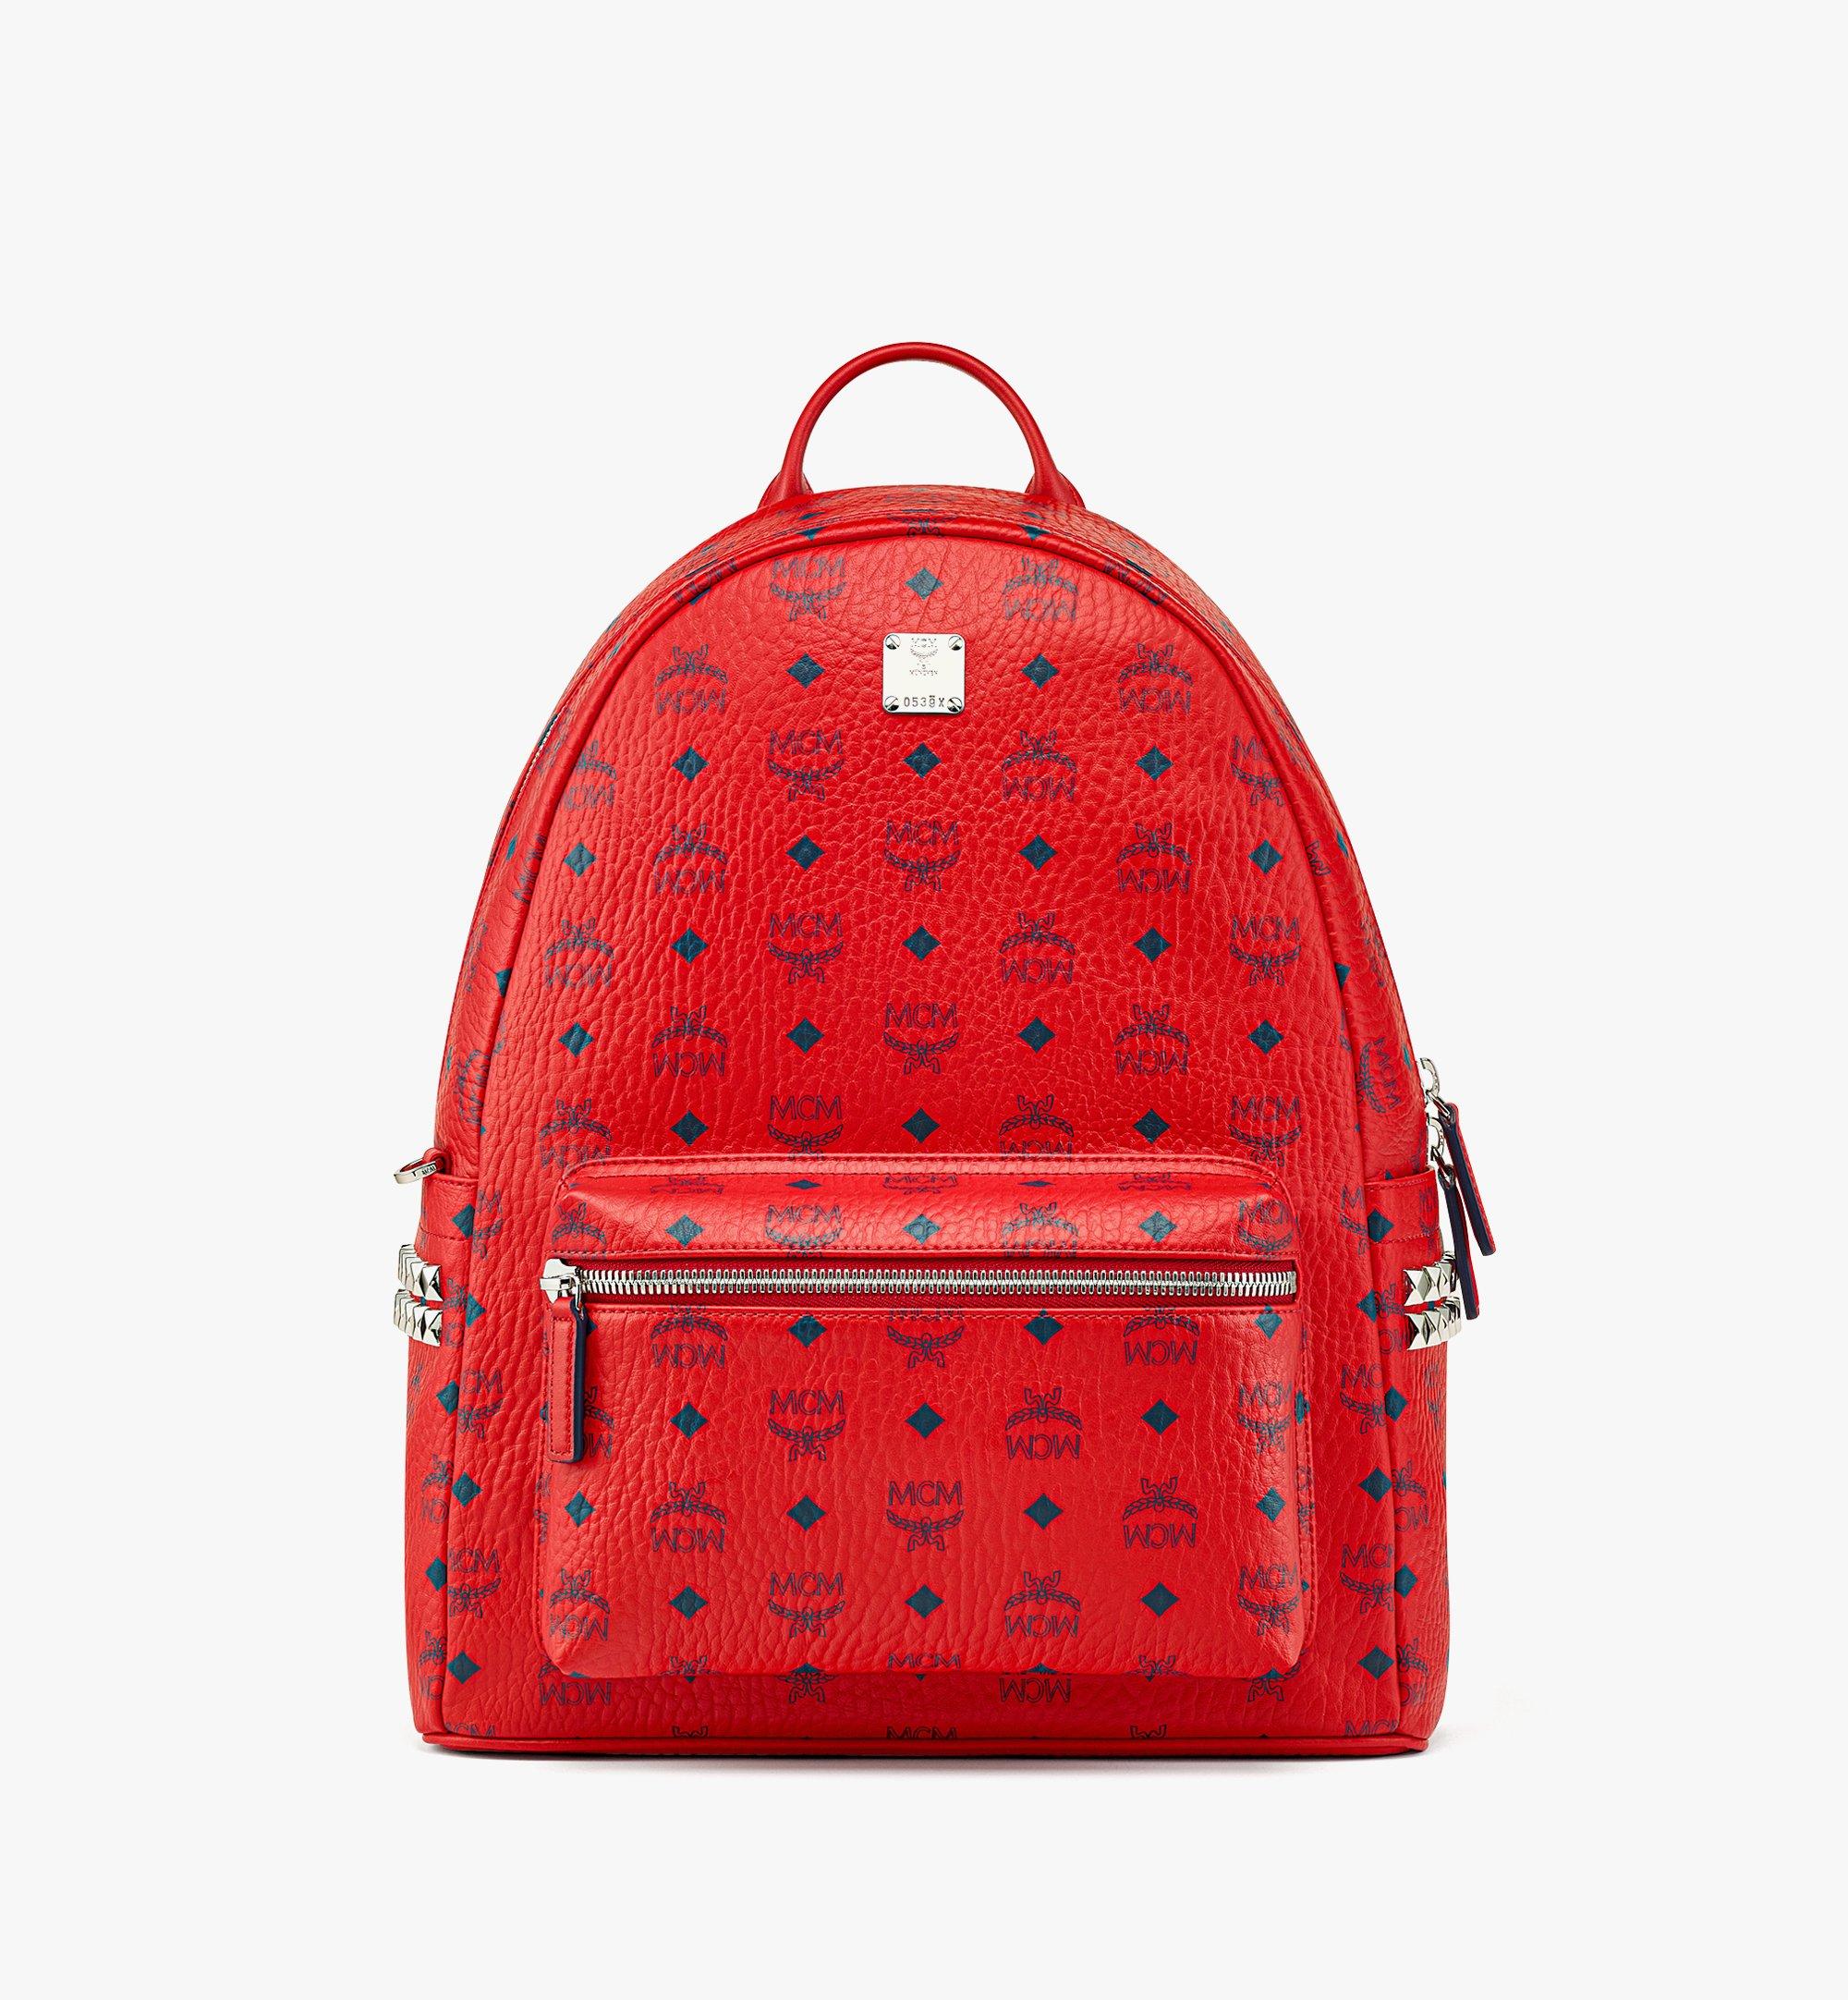 MCM Stark Side Studs Backpack in Visetos Red MMKAAVE09XC001 Alternate View 1